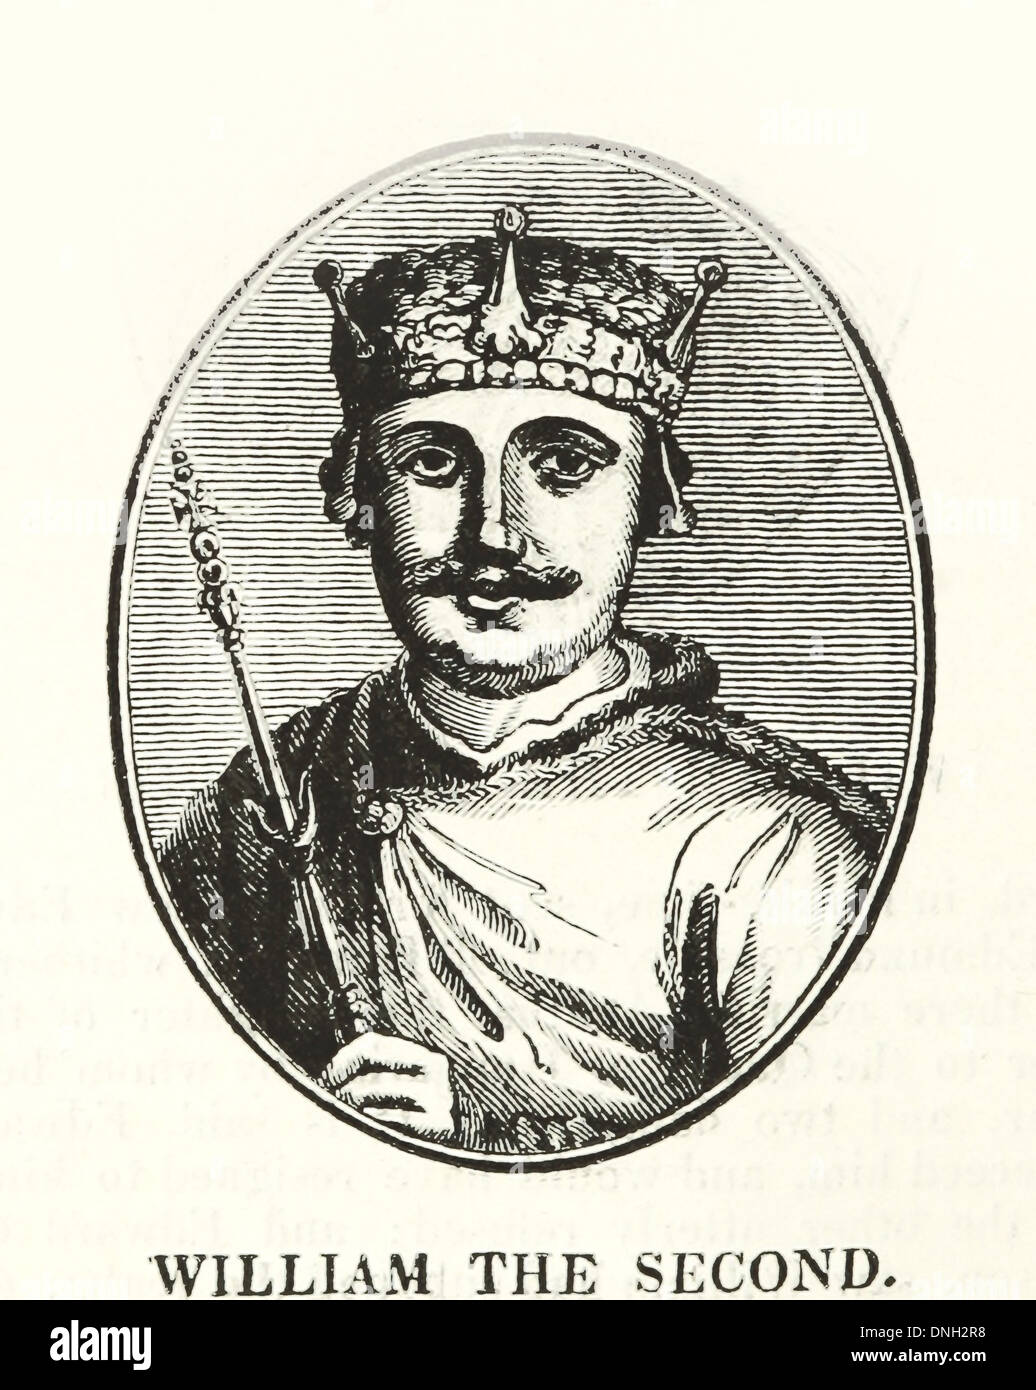 William II the Second - wood engraving Stock Photo